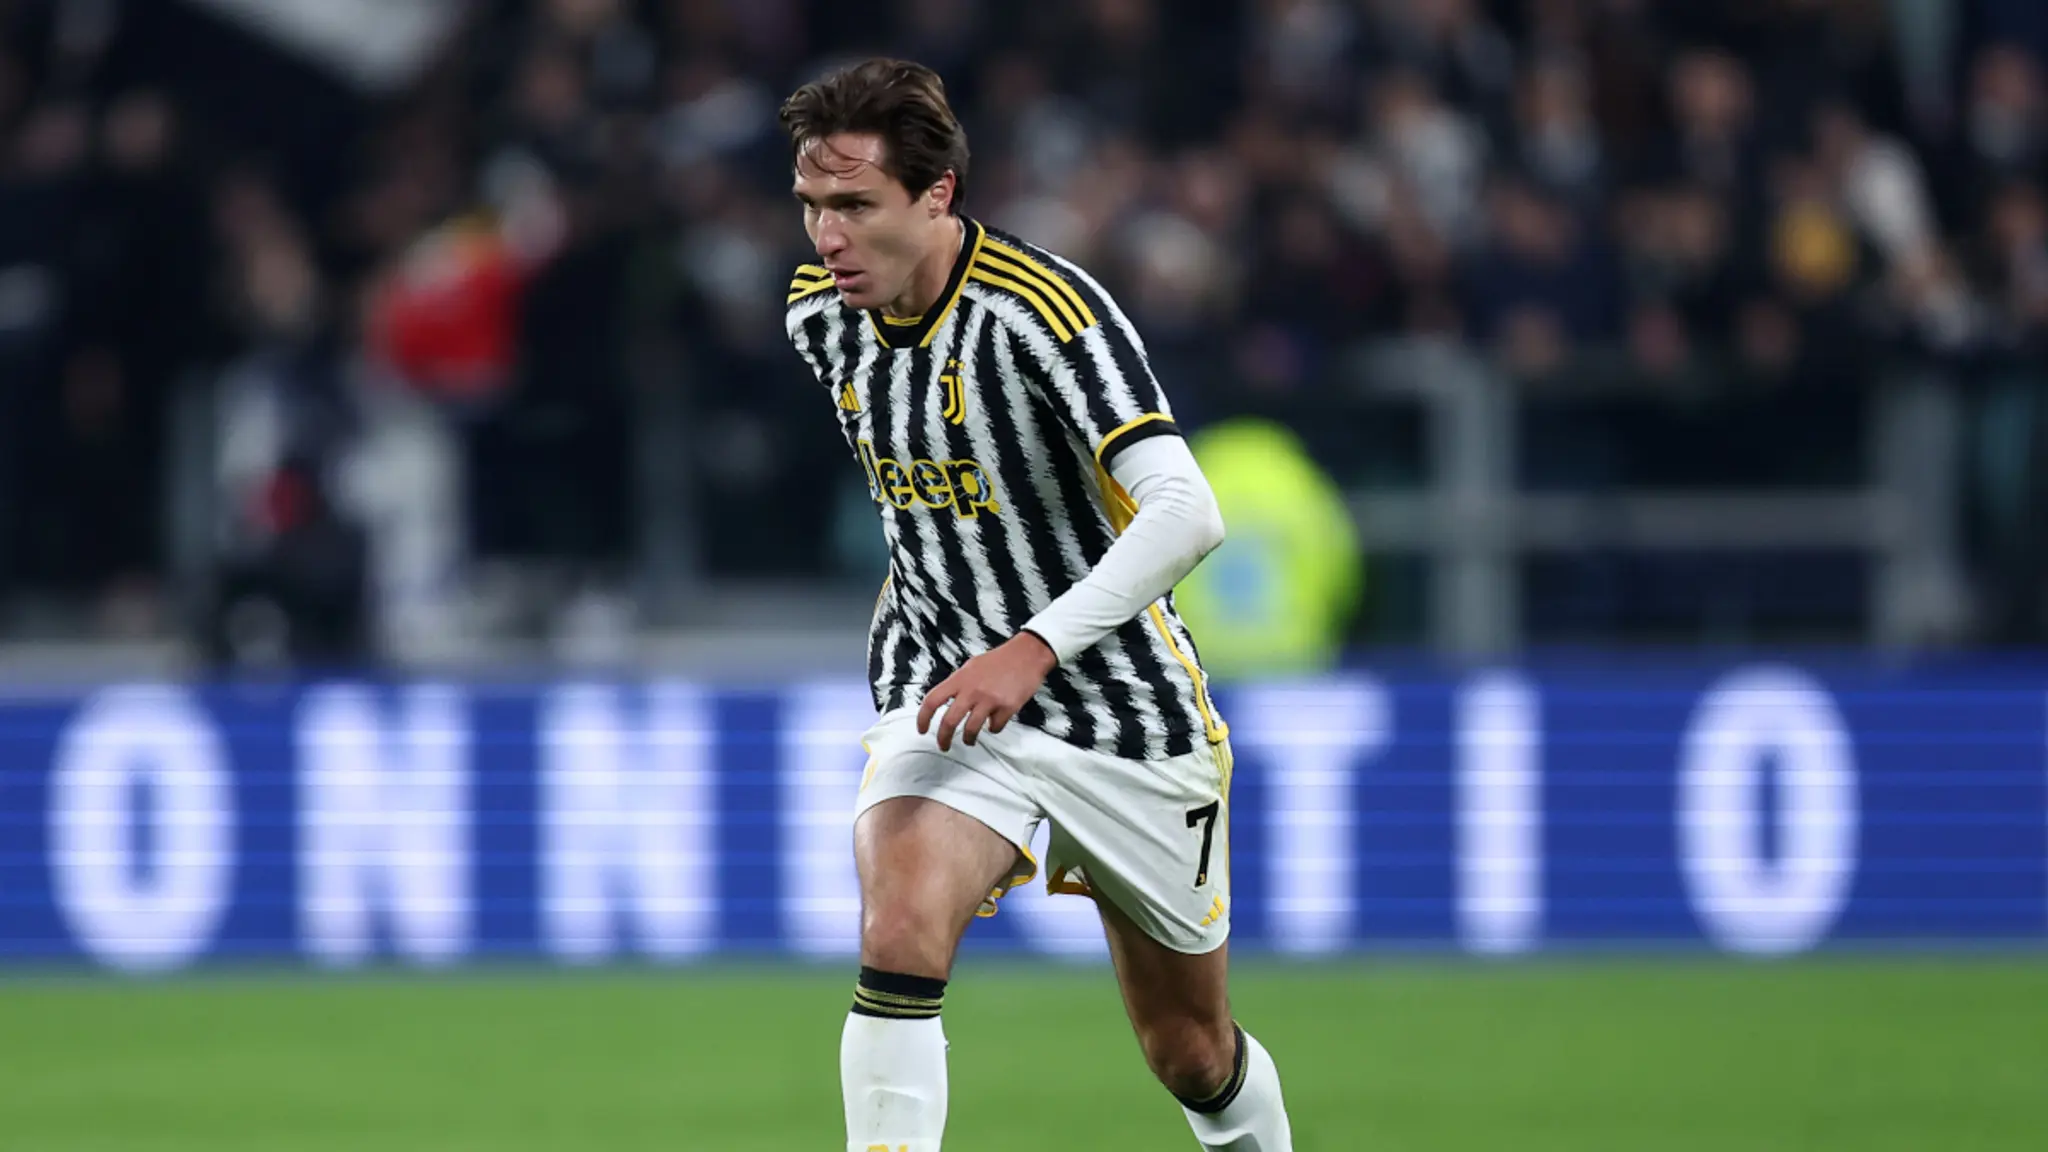 Federico Chiesa has scored just once in the last two months, and the concerns about his Juventus future are beginning to intensify for a few reasons